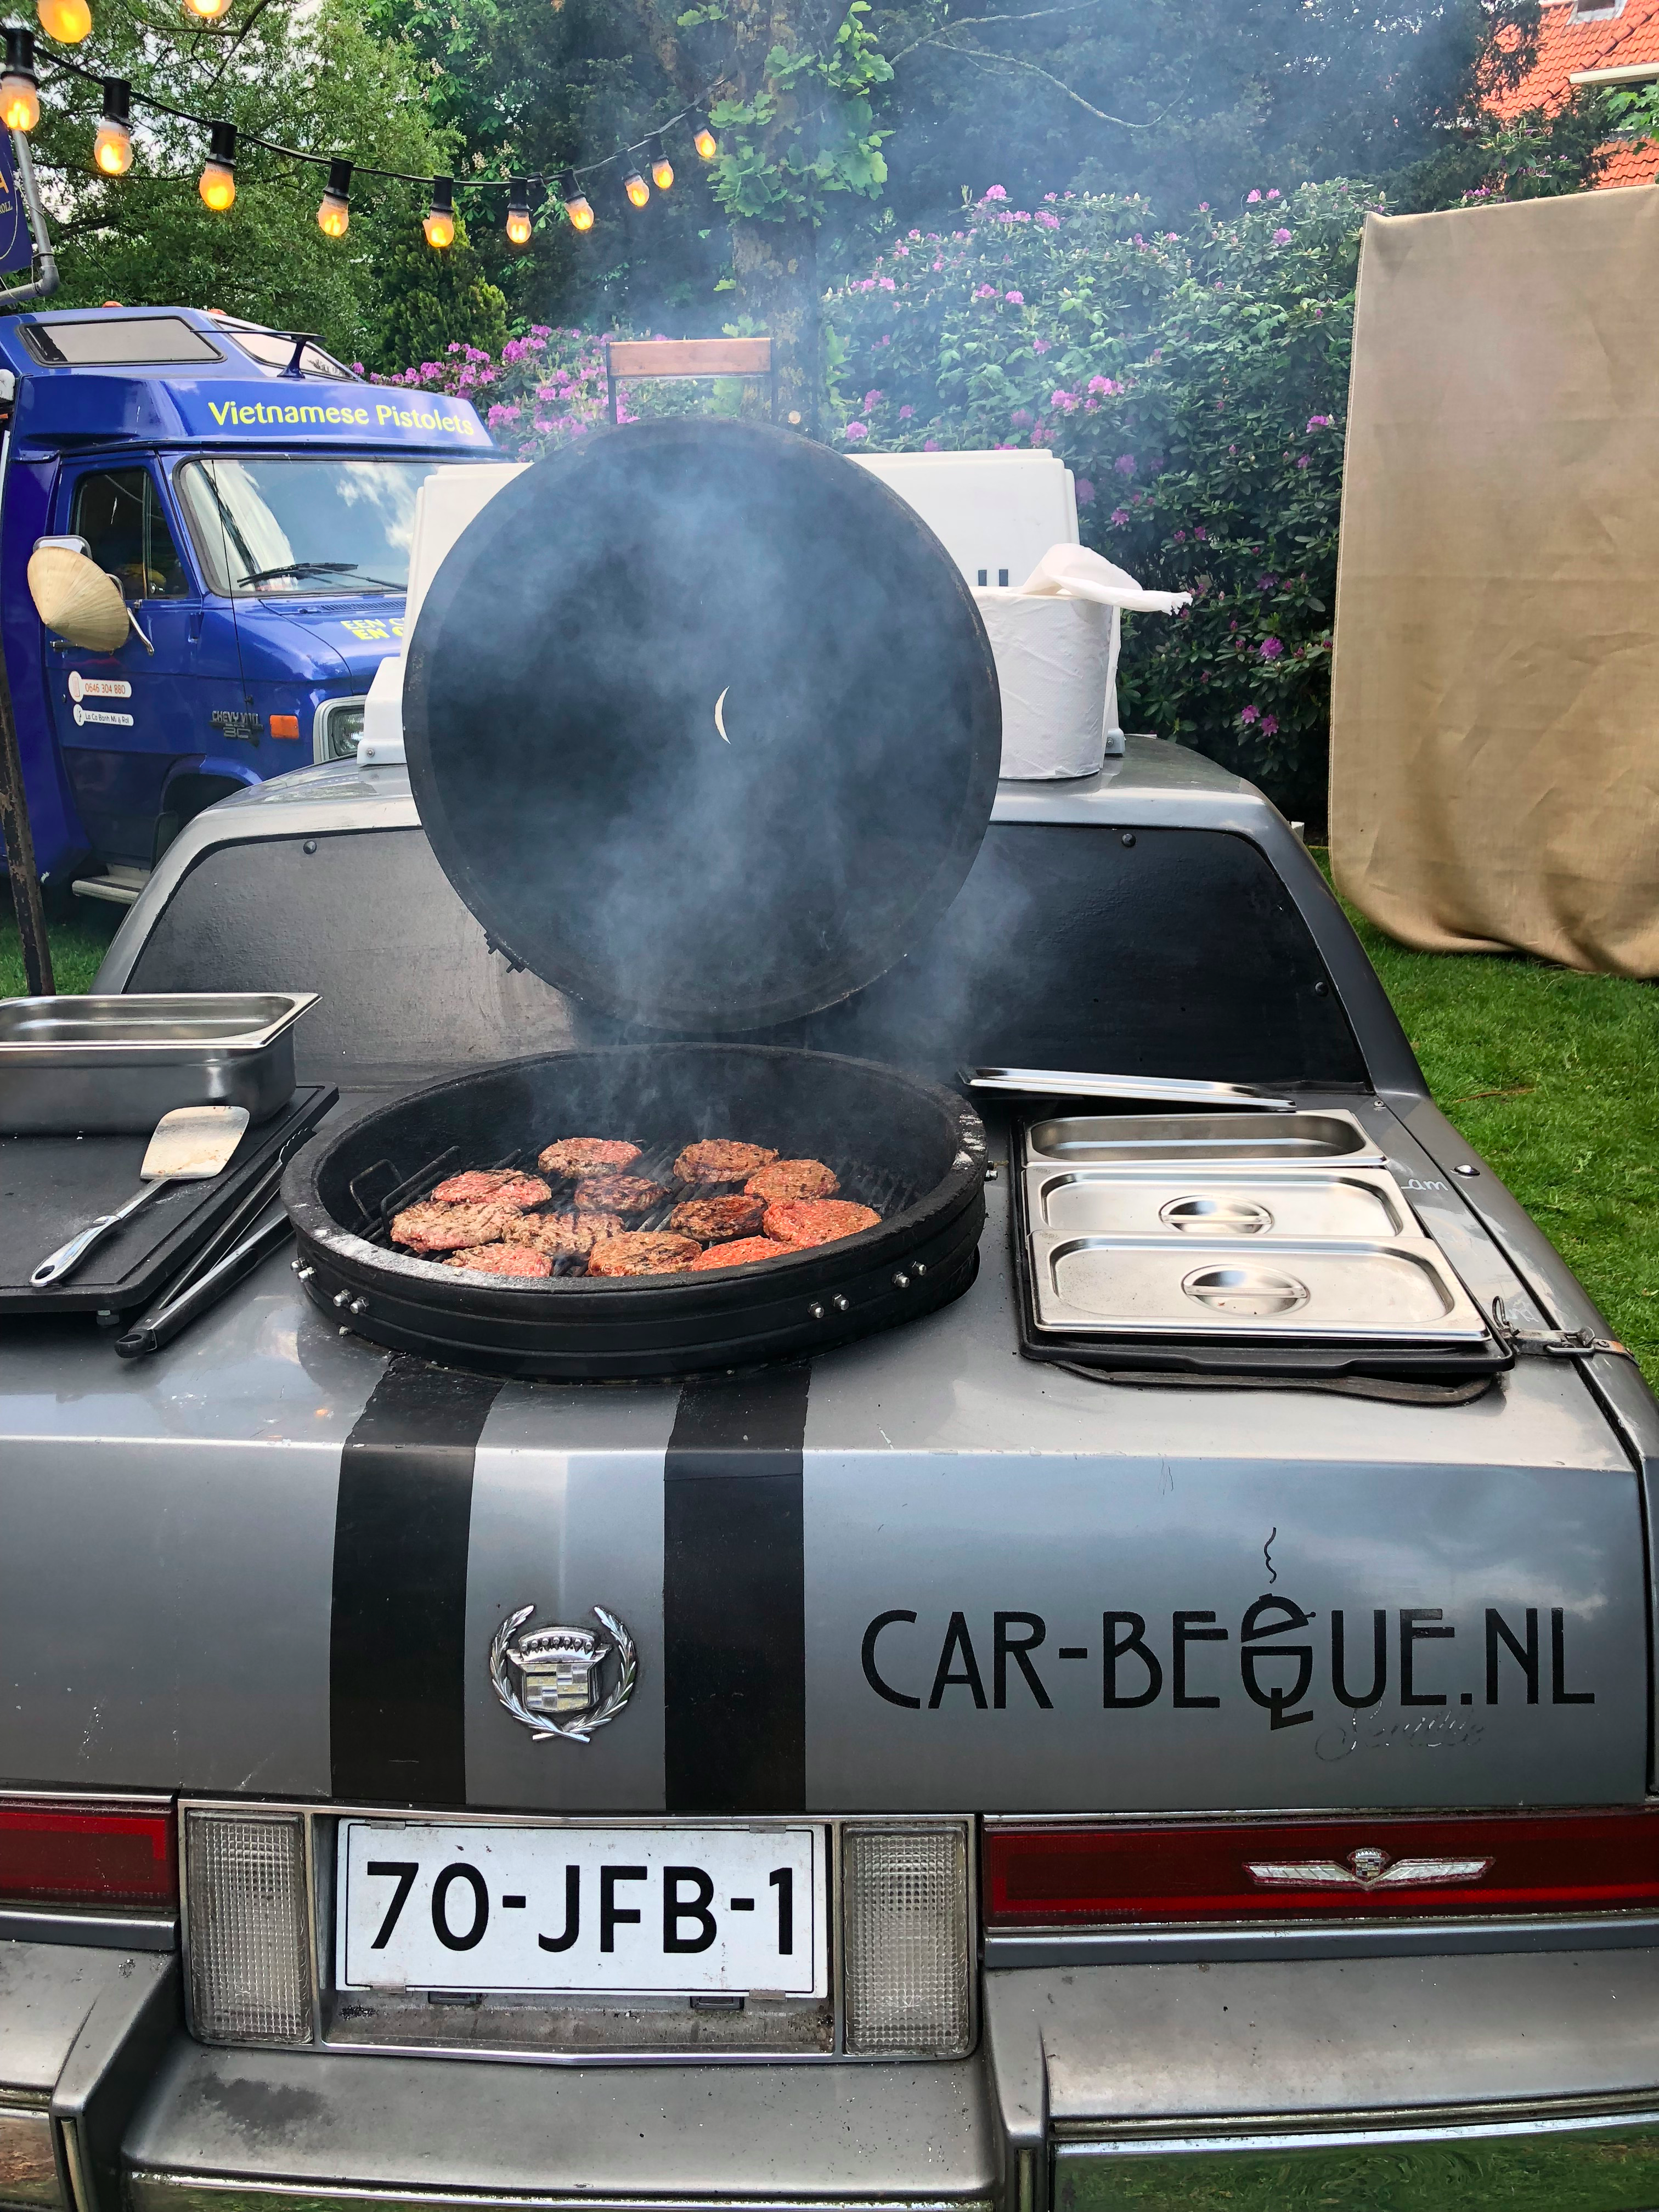 Carbeque